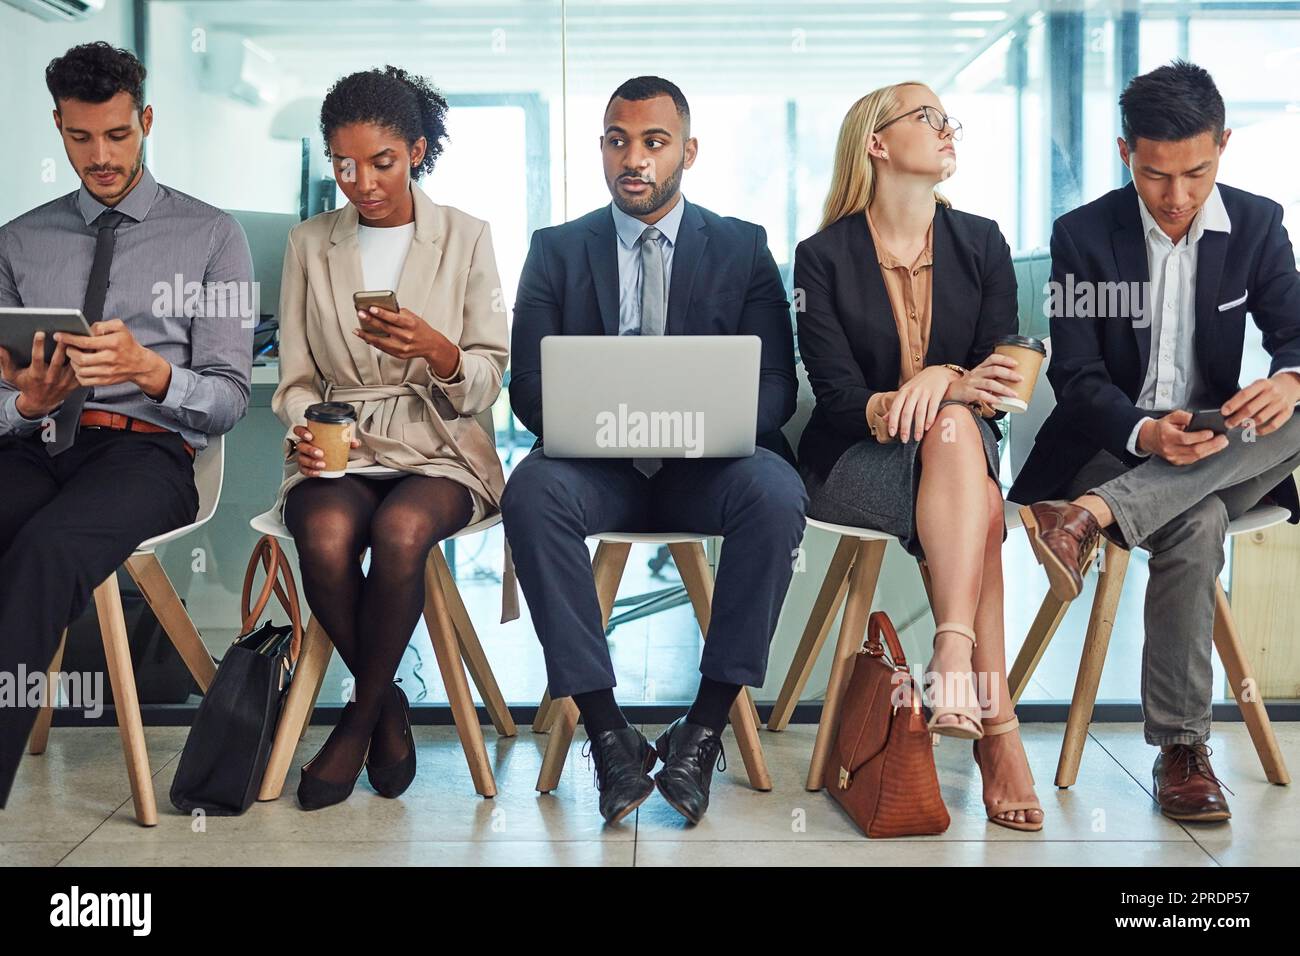 a group of focussed young businesspeople seated together on chairs and making notes using different methods while waiting in the office during the day Stock Photo